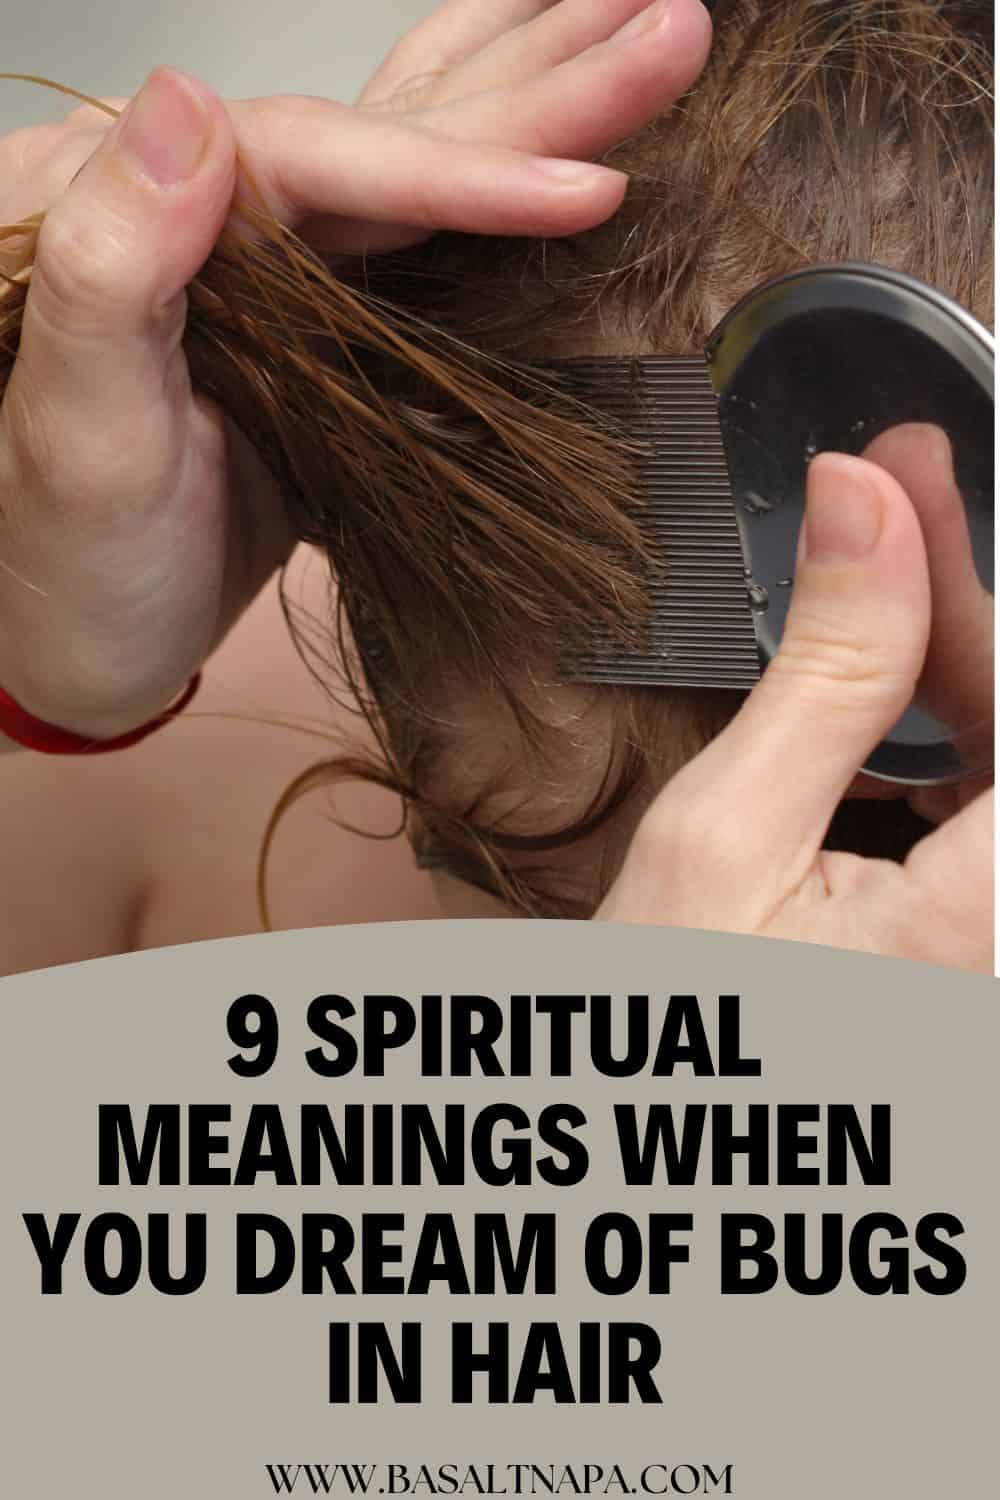 9 Spiritual Meanings When You Dream of Bugs In Hair